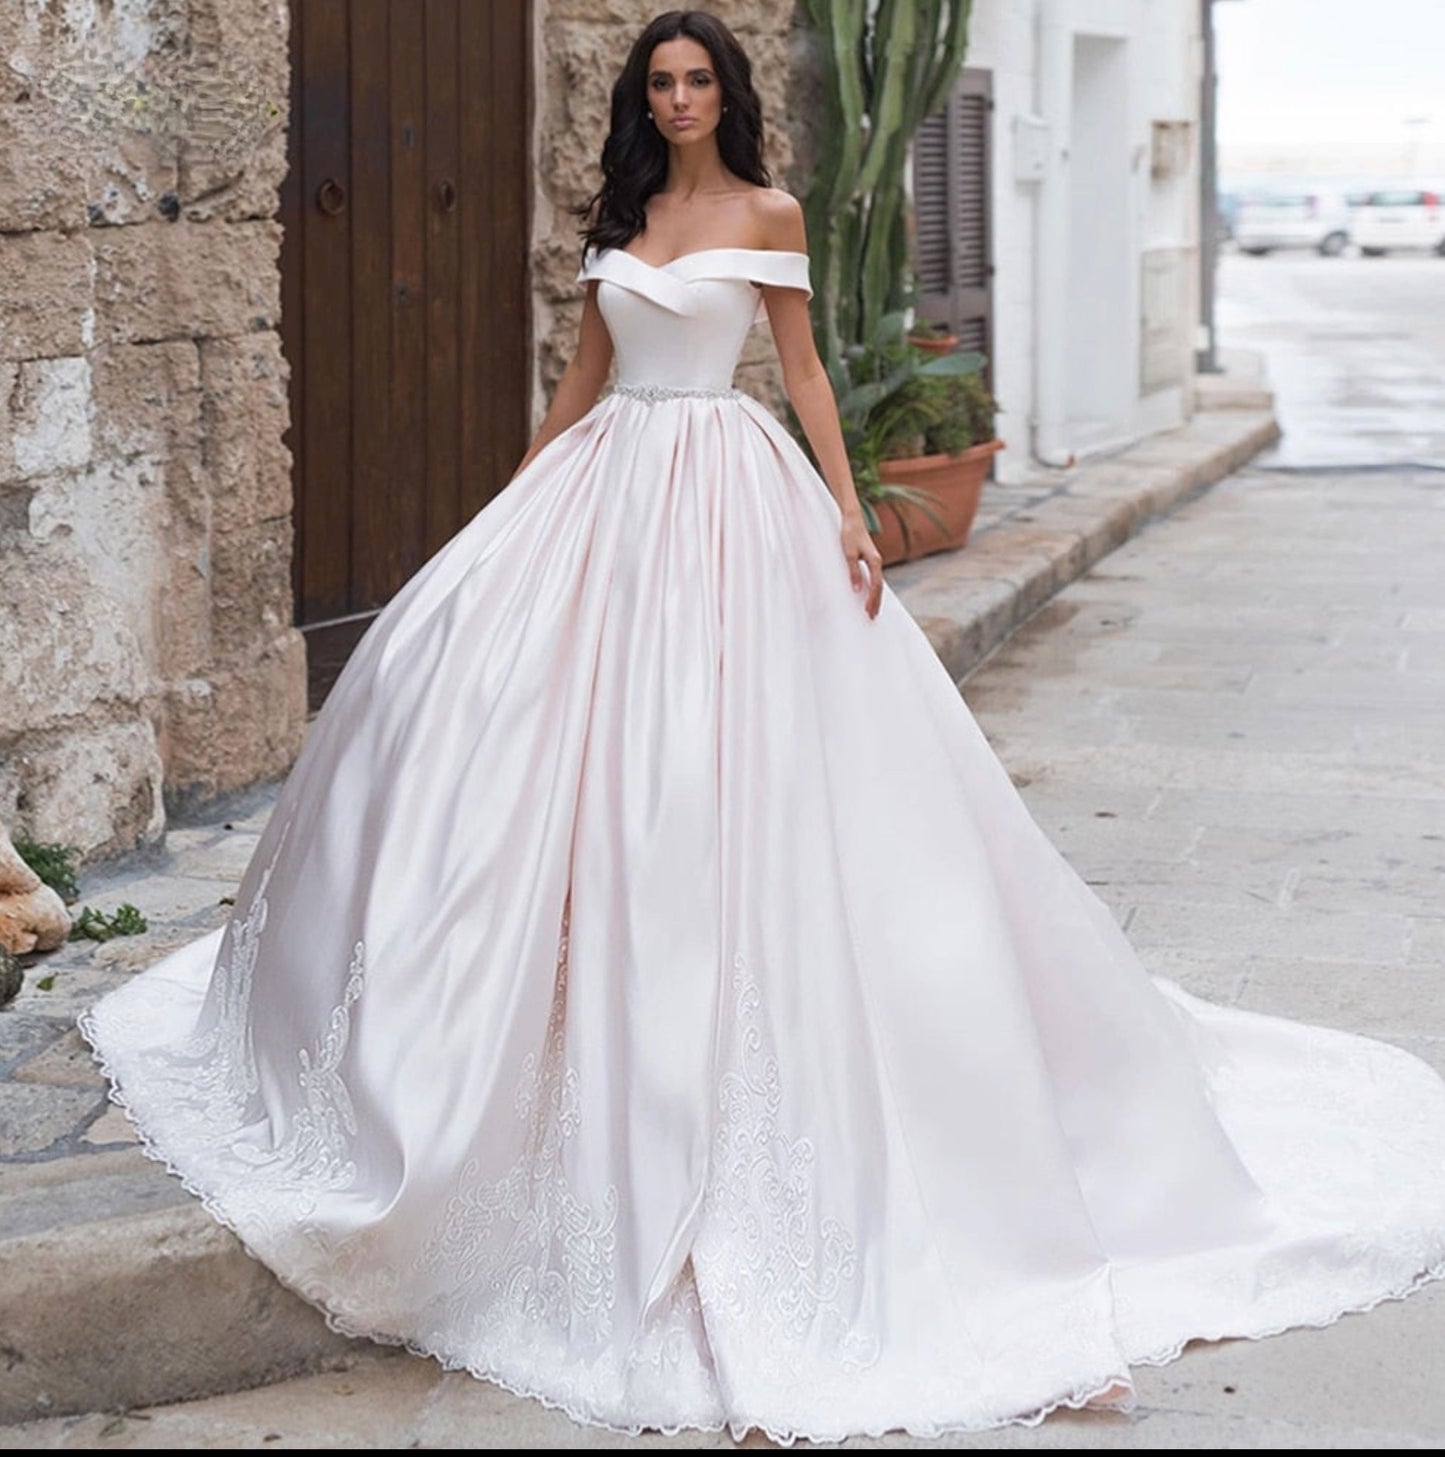 Ivory Satin Ball Gown Sweetheart Wedding Dresses MW626 | Musebridals